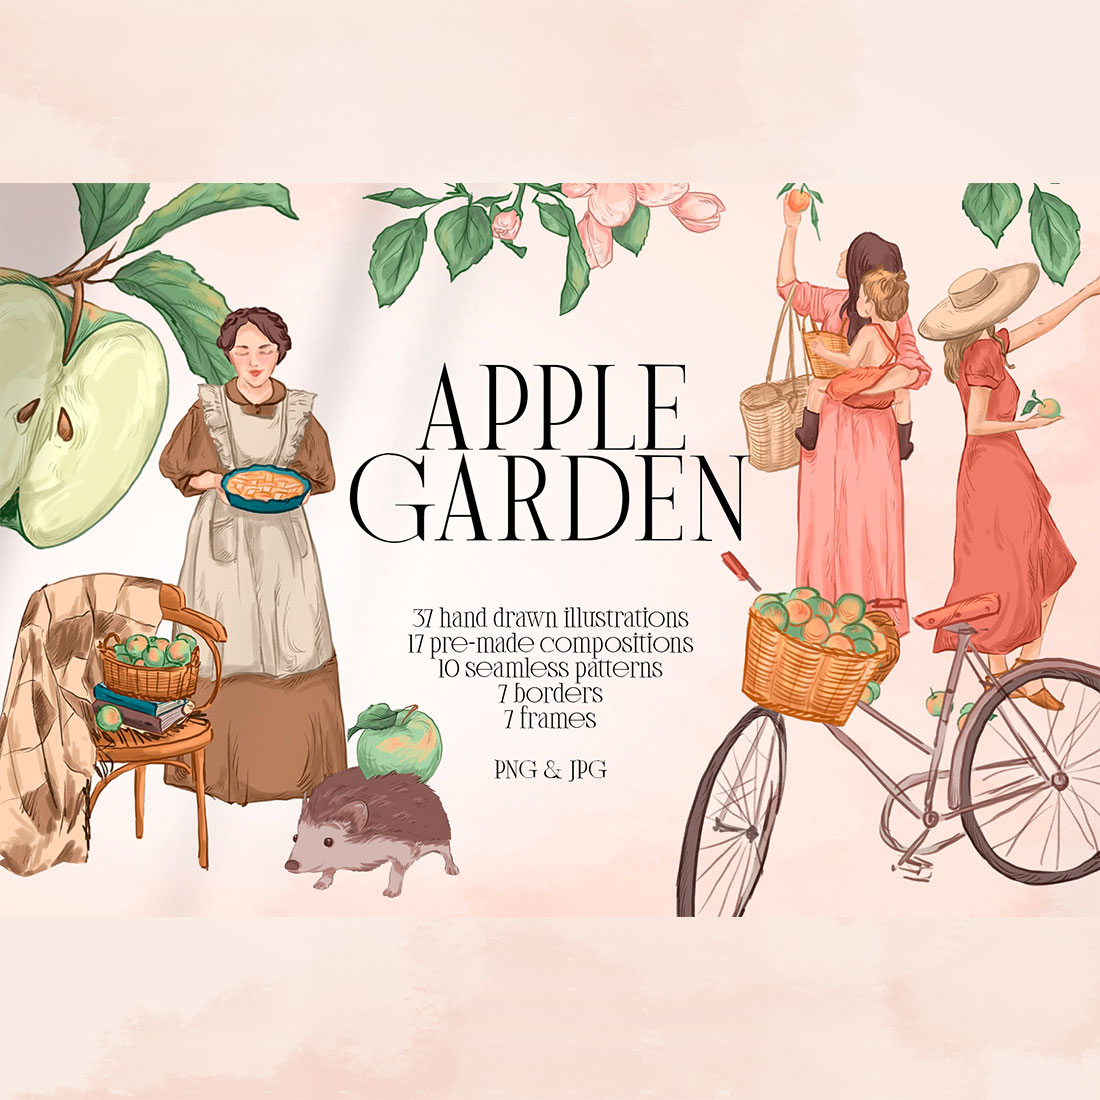 Apple Garden Collection cover image.